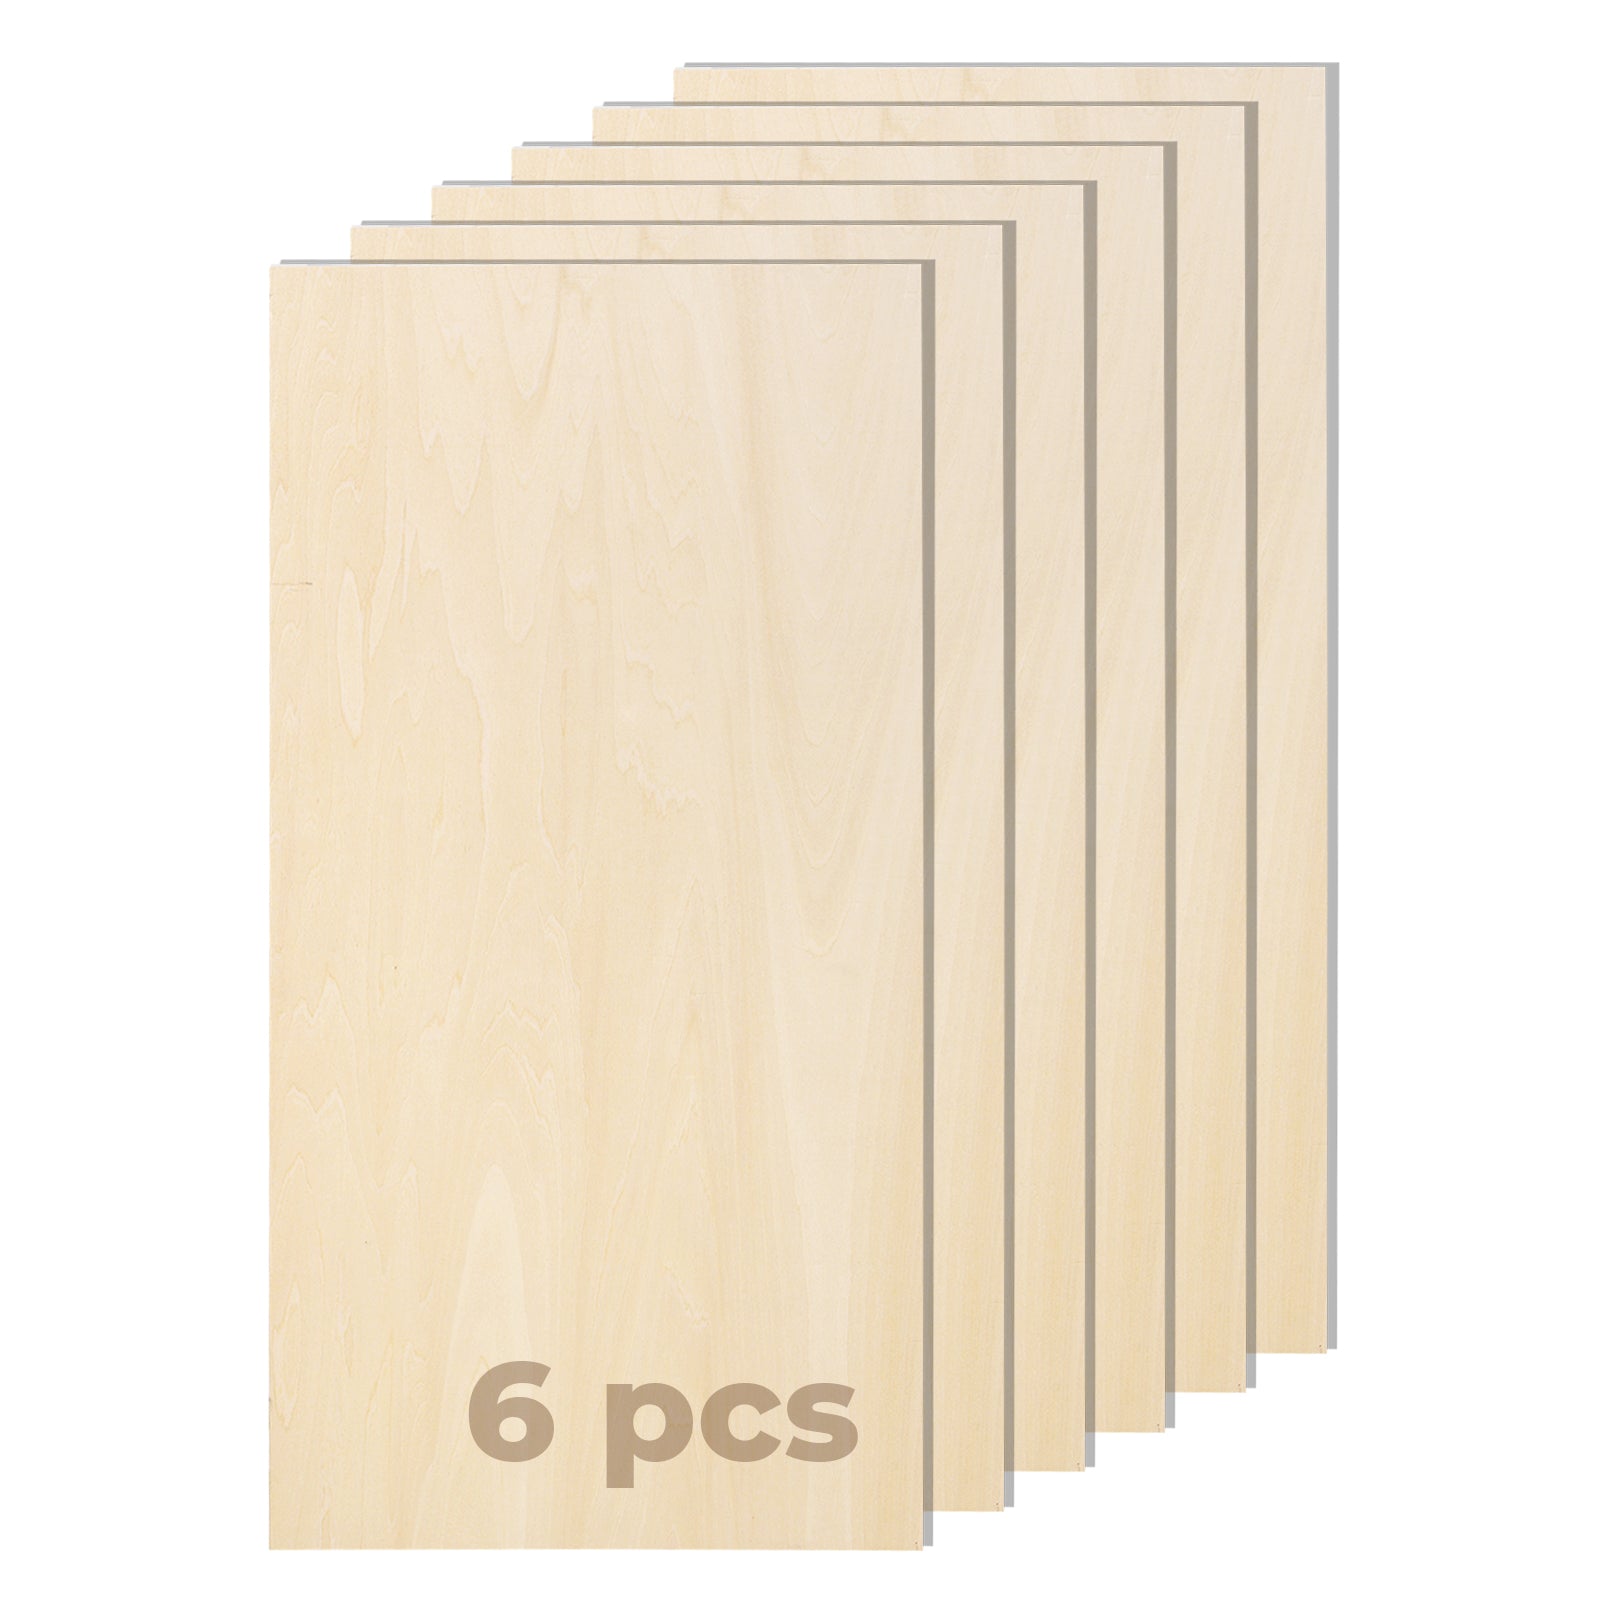 OUYZGIA 10 Pcs Plywood Basswood Sheets 11.8”x11.8”x1/8” 3mm Plywood Board for Laser Cutting Engraving Crafts, Unfinished Wood Sheets for DIY